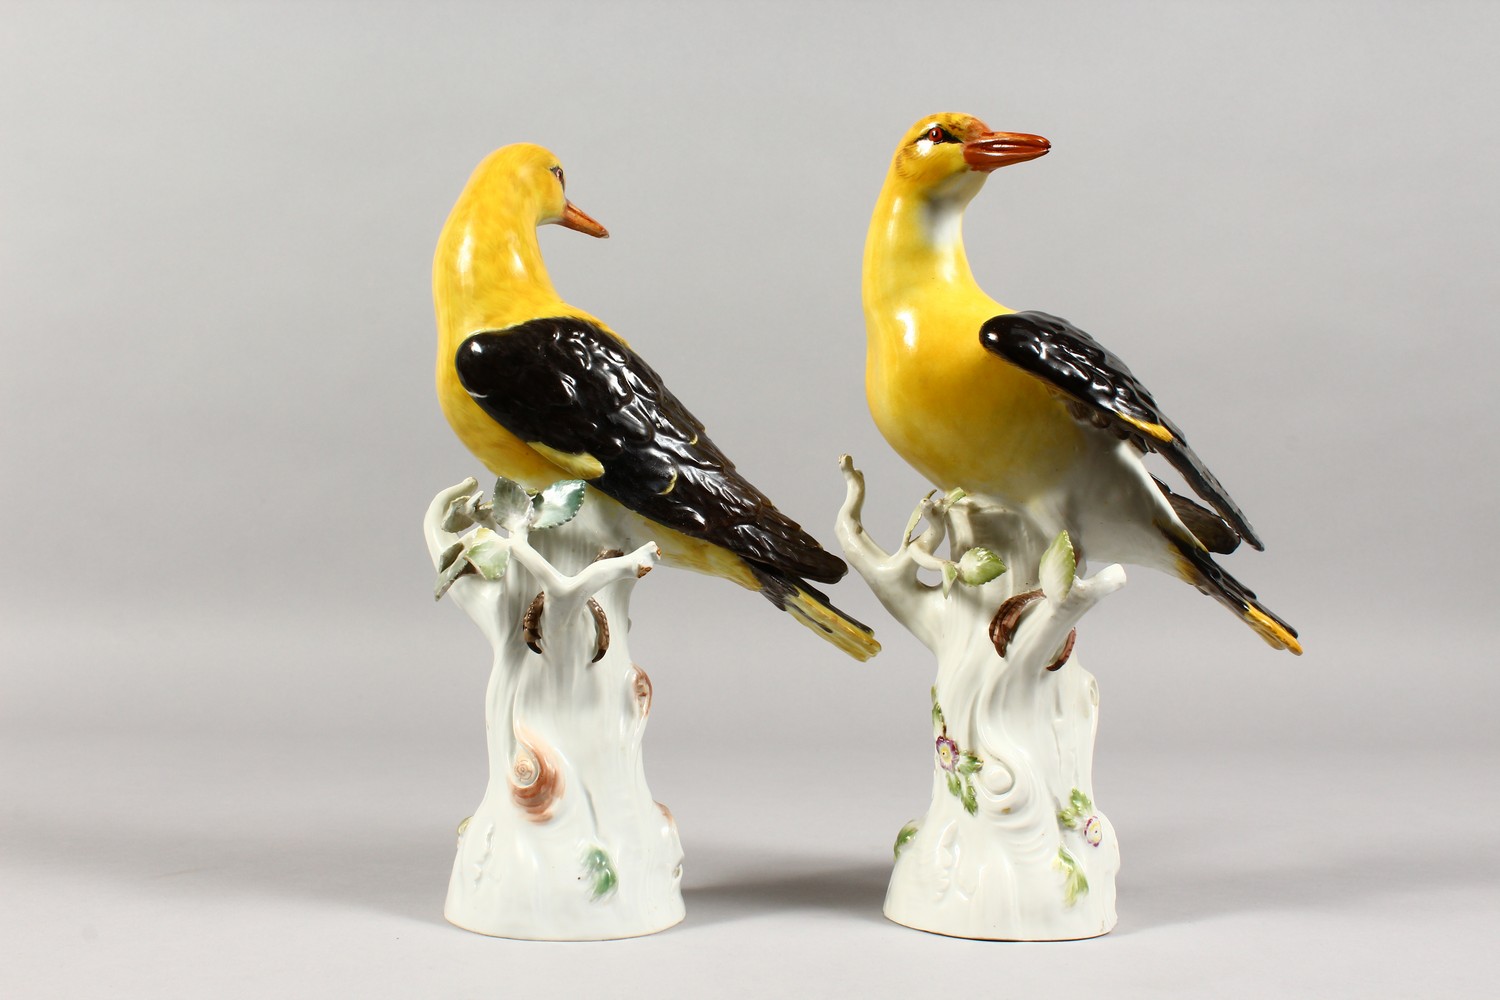 A VERY GOOD PAIR OF 19TH CENTURY MEISSEN BIRDS "GOLDEN ORIOLES" standing on encrusted tree stumps. - Image 6 of 18